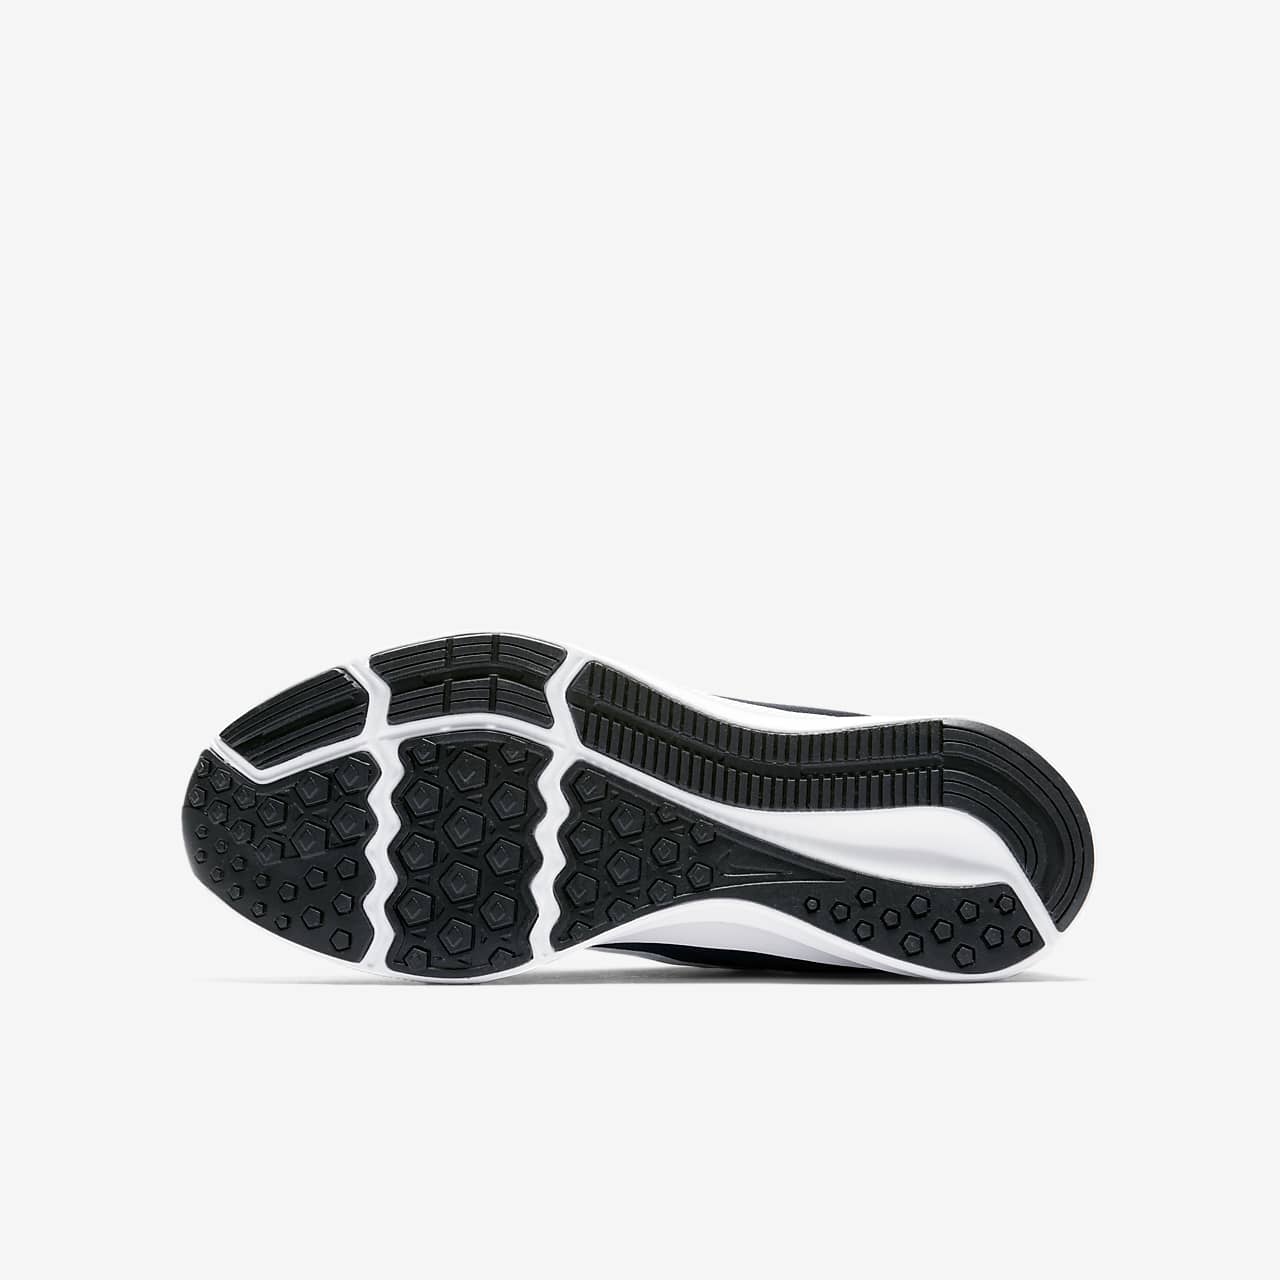 nike downshifter 8 black and white